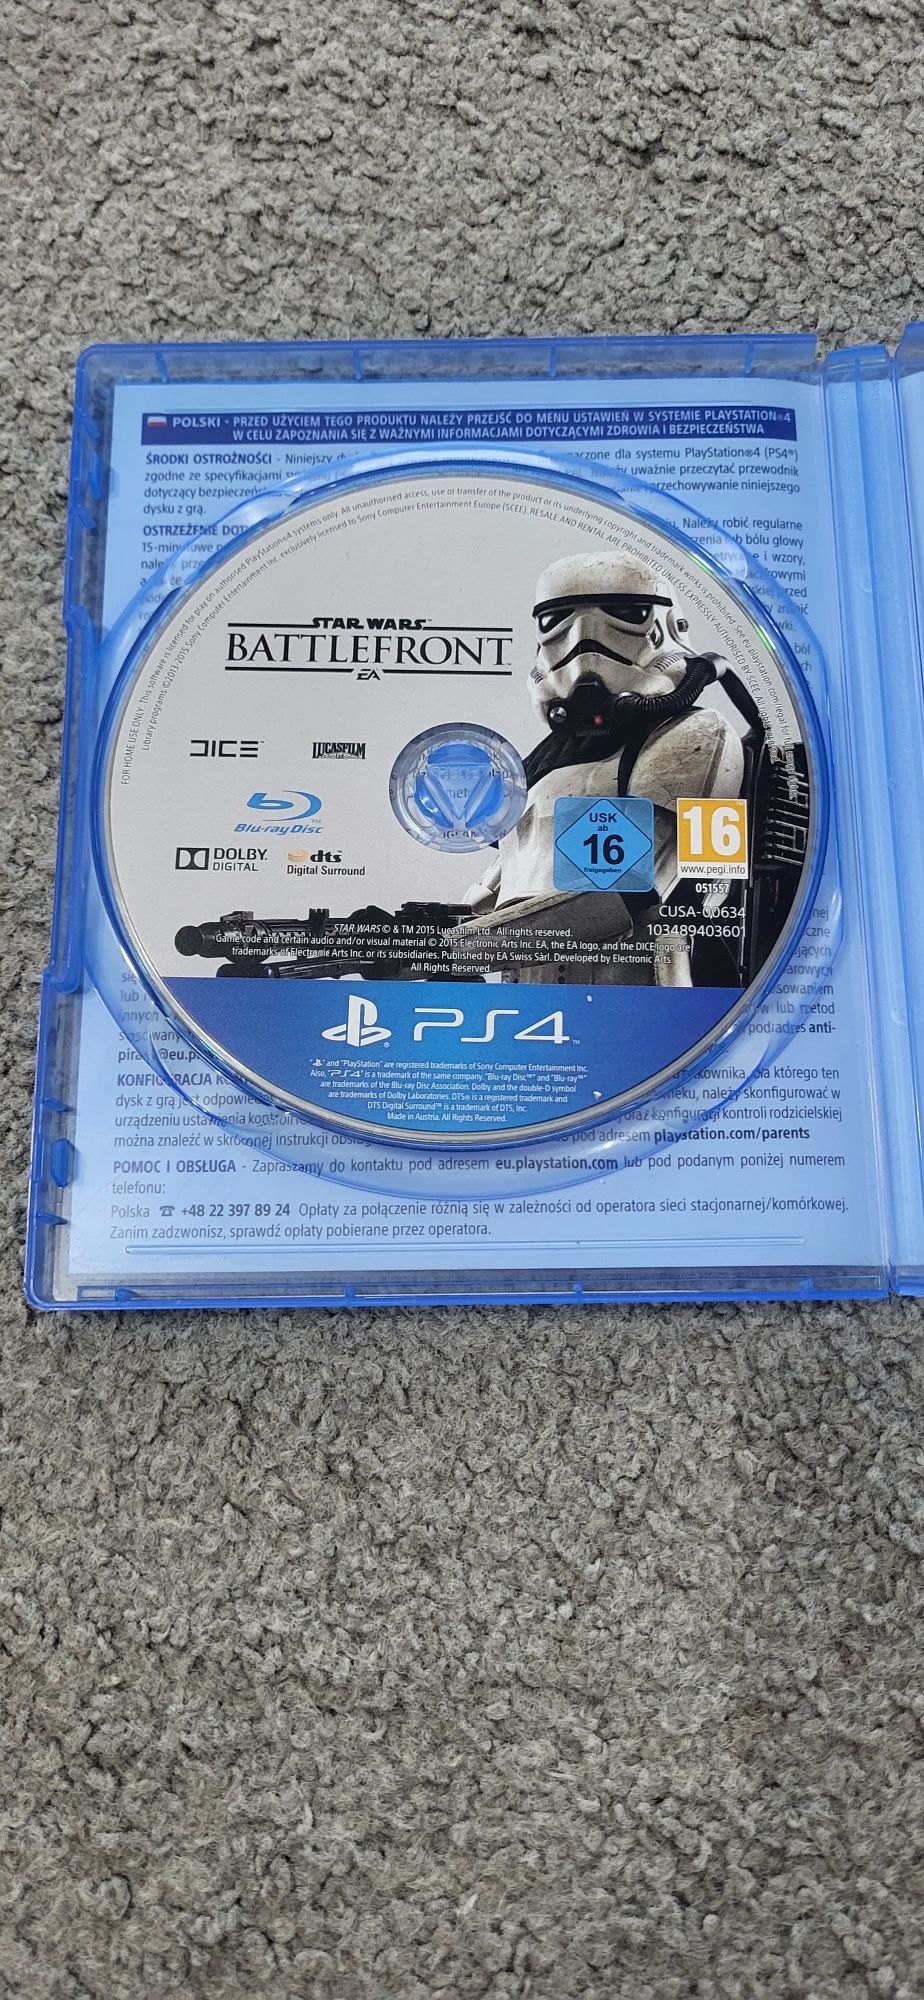 PS4 star wars battlefront ultimate edition